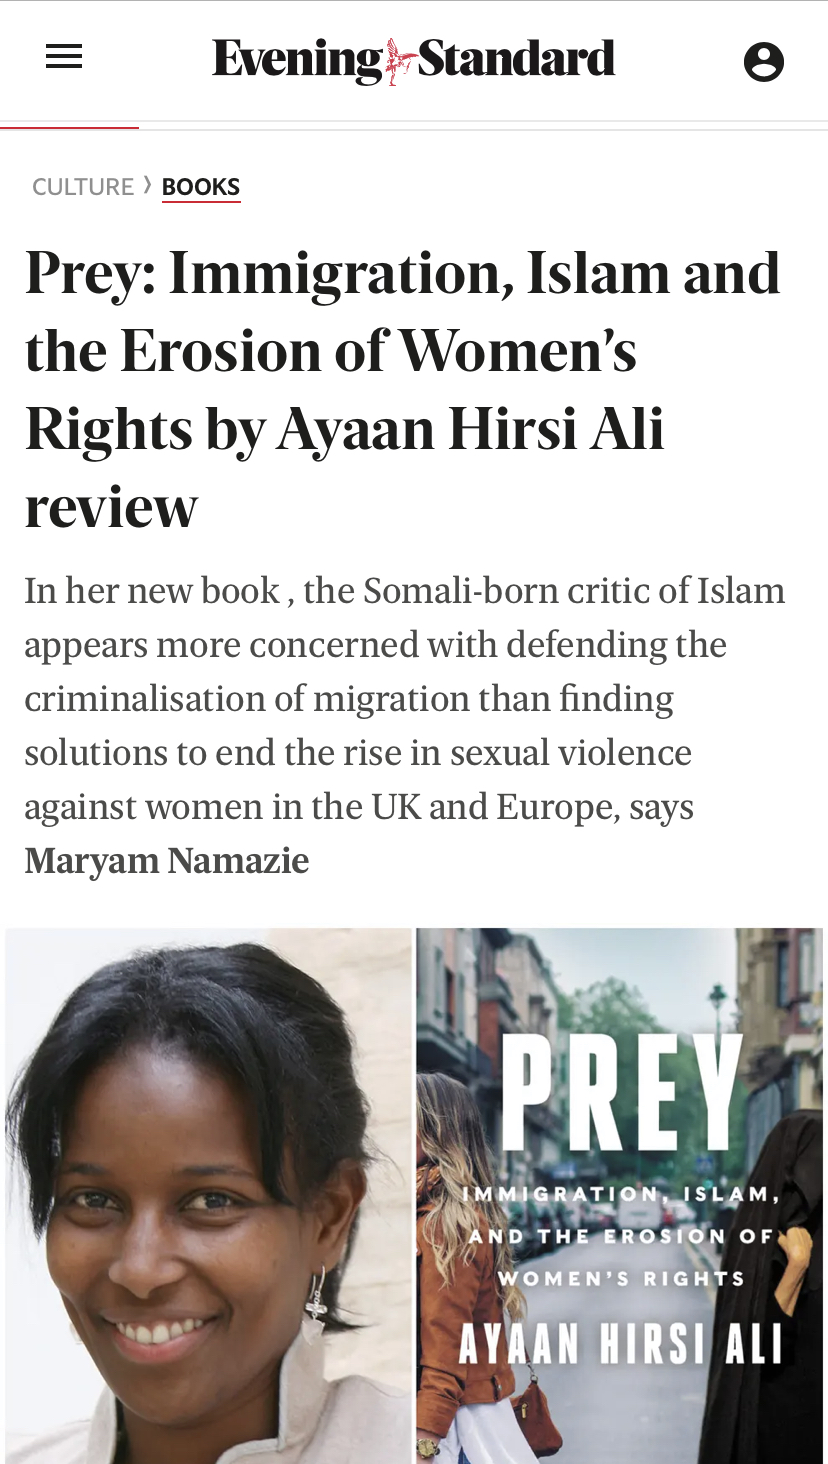 Maryam Namazie’s Review of Prey: Immigration, Islam and the Erosion of Women’s Rights by Ayaan Hirsi Ali, Evening Standard, 27 February 2021